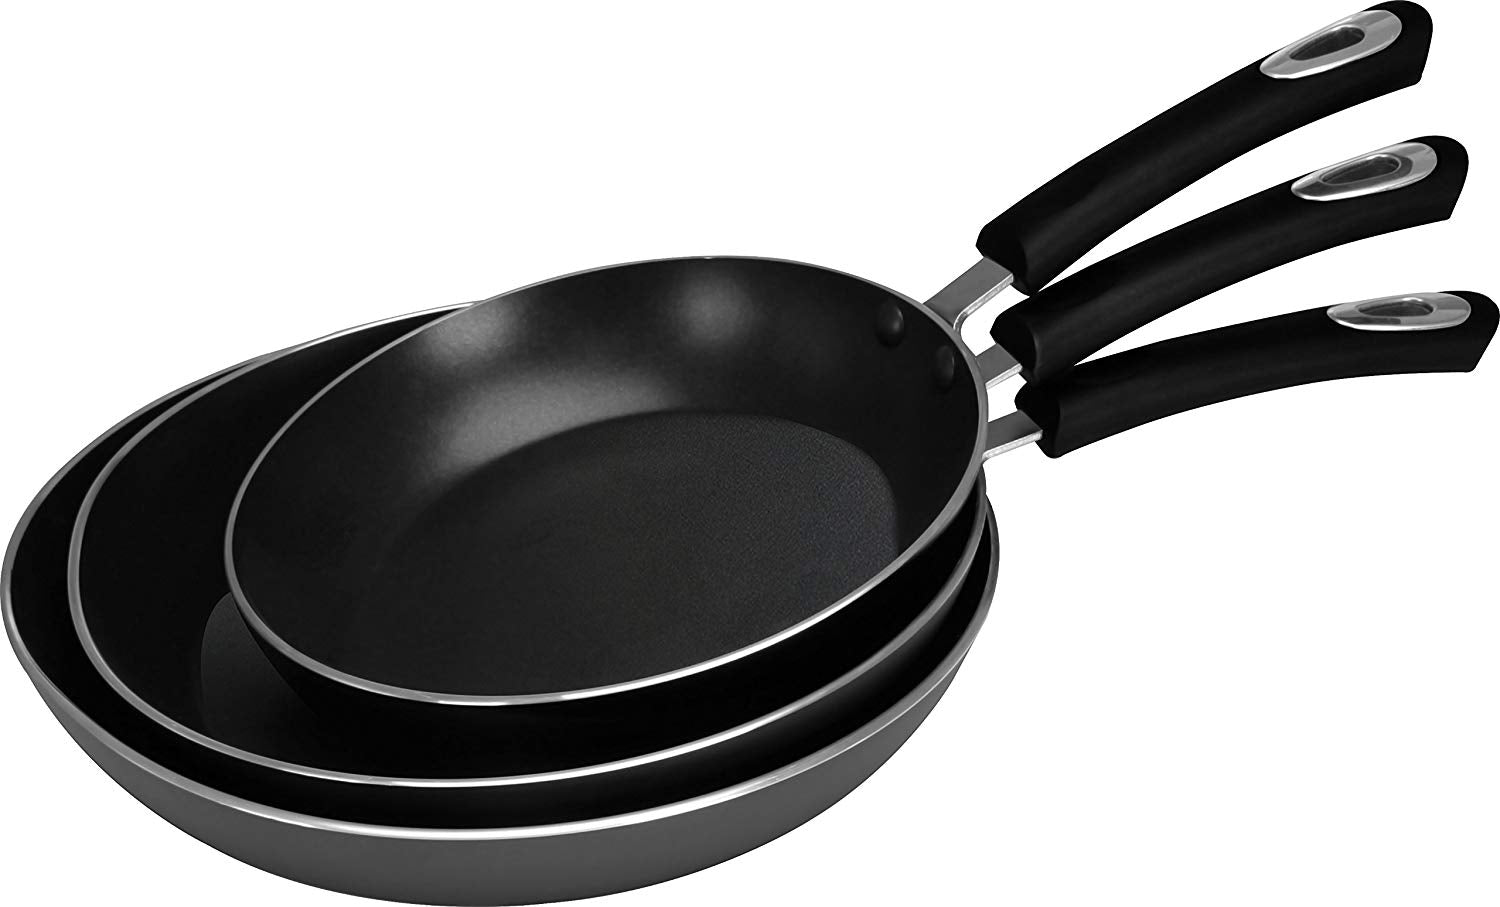 Utopia Kitchen Saute Fry Pan - Nonstick Frying Pan - 11 Inch Induction  Bottom - Aluminum Alloy and Scratch Resistant Body - Riveted Handle